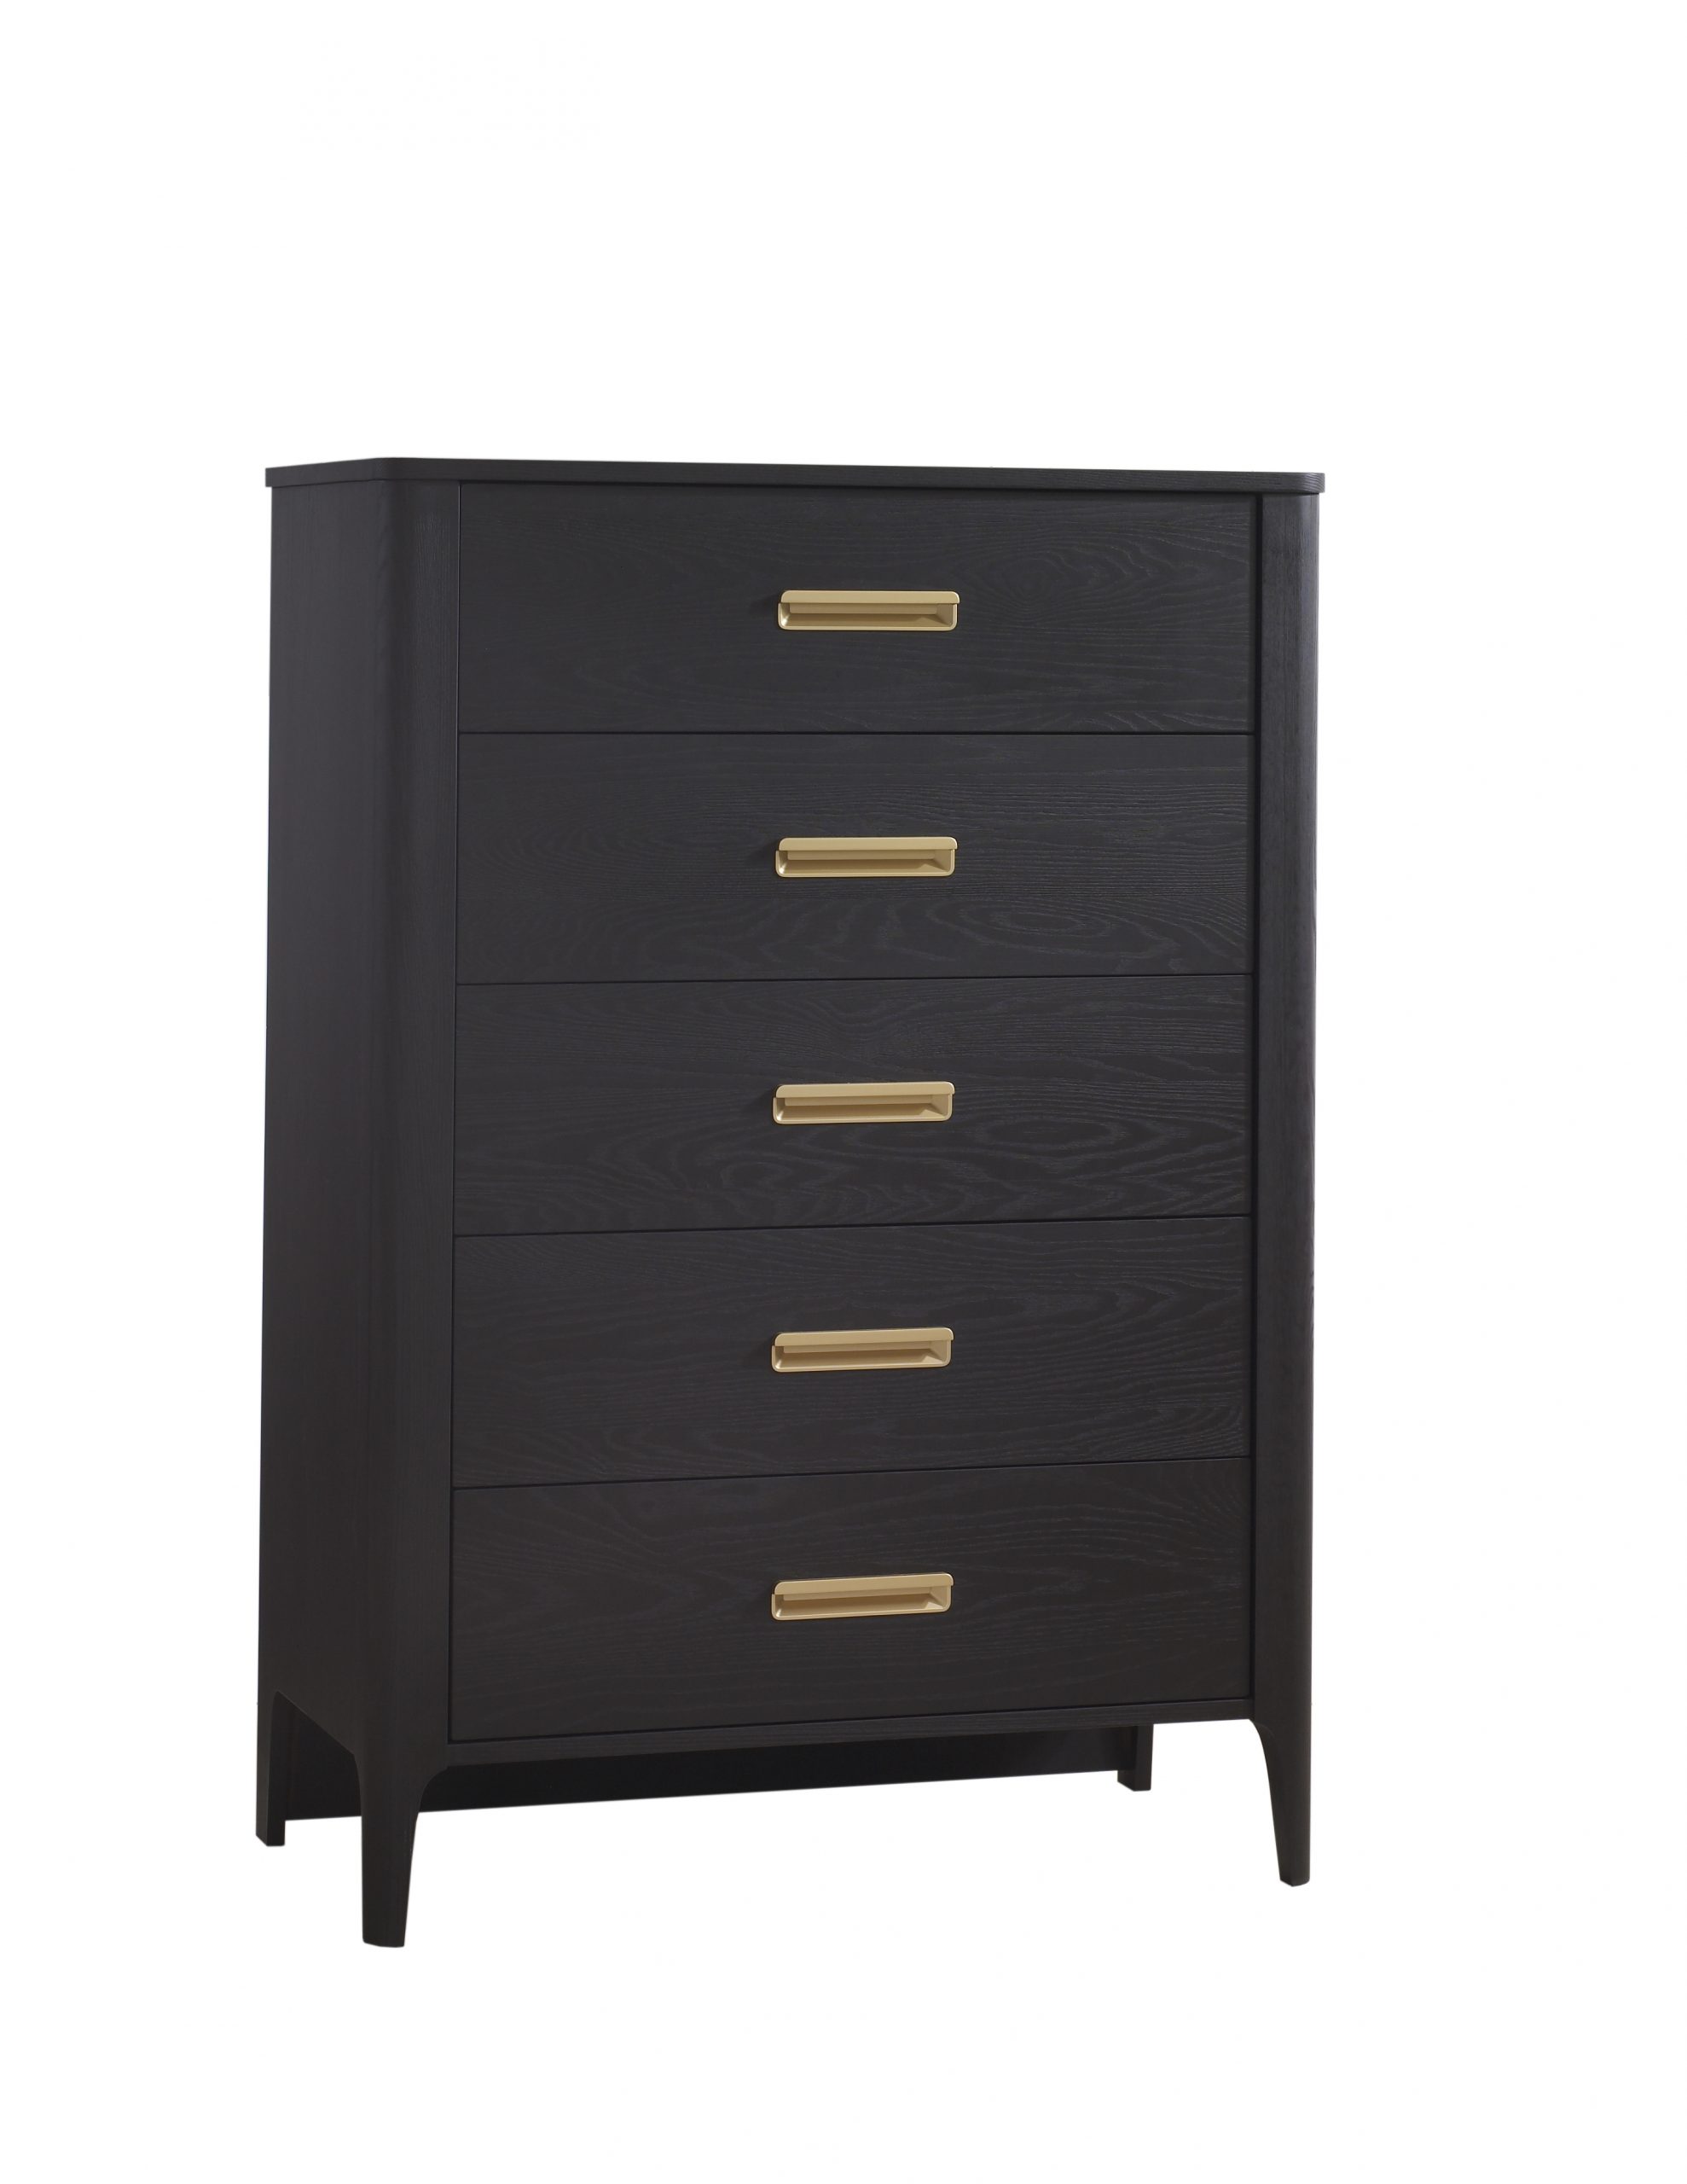 Palo 5 Drawer Tall Chest in Dusk